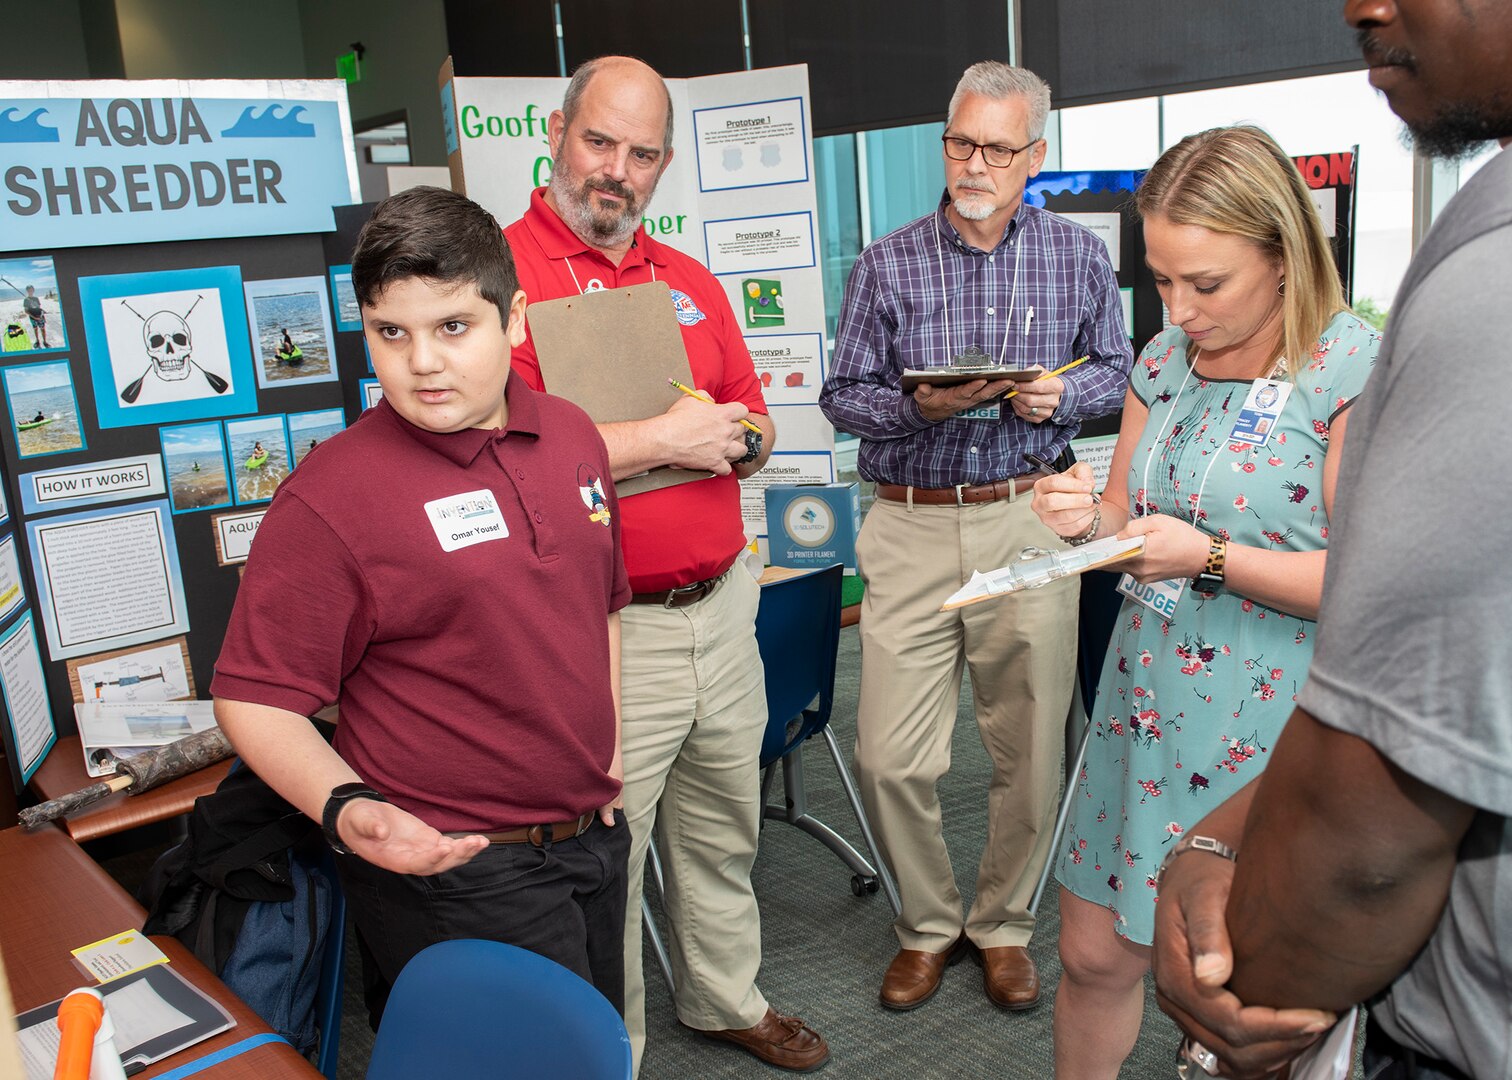 Scientists and engineers from Naval Surface Warfare Center Panama City Division (NSWC PCD) and personnel from other organizations served as judges for this year's Invention Convention. Darryl Updegrove, back right, serves as a branch head at NSWC PCD.